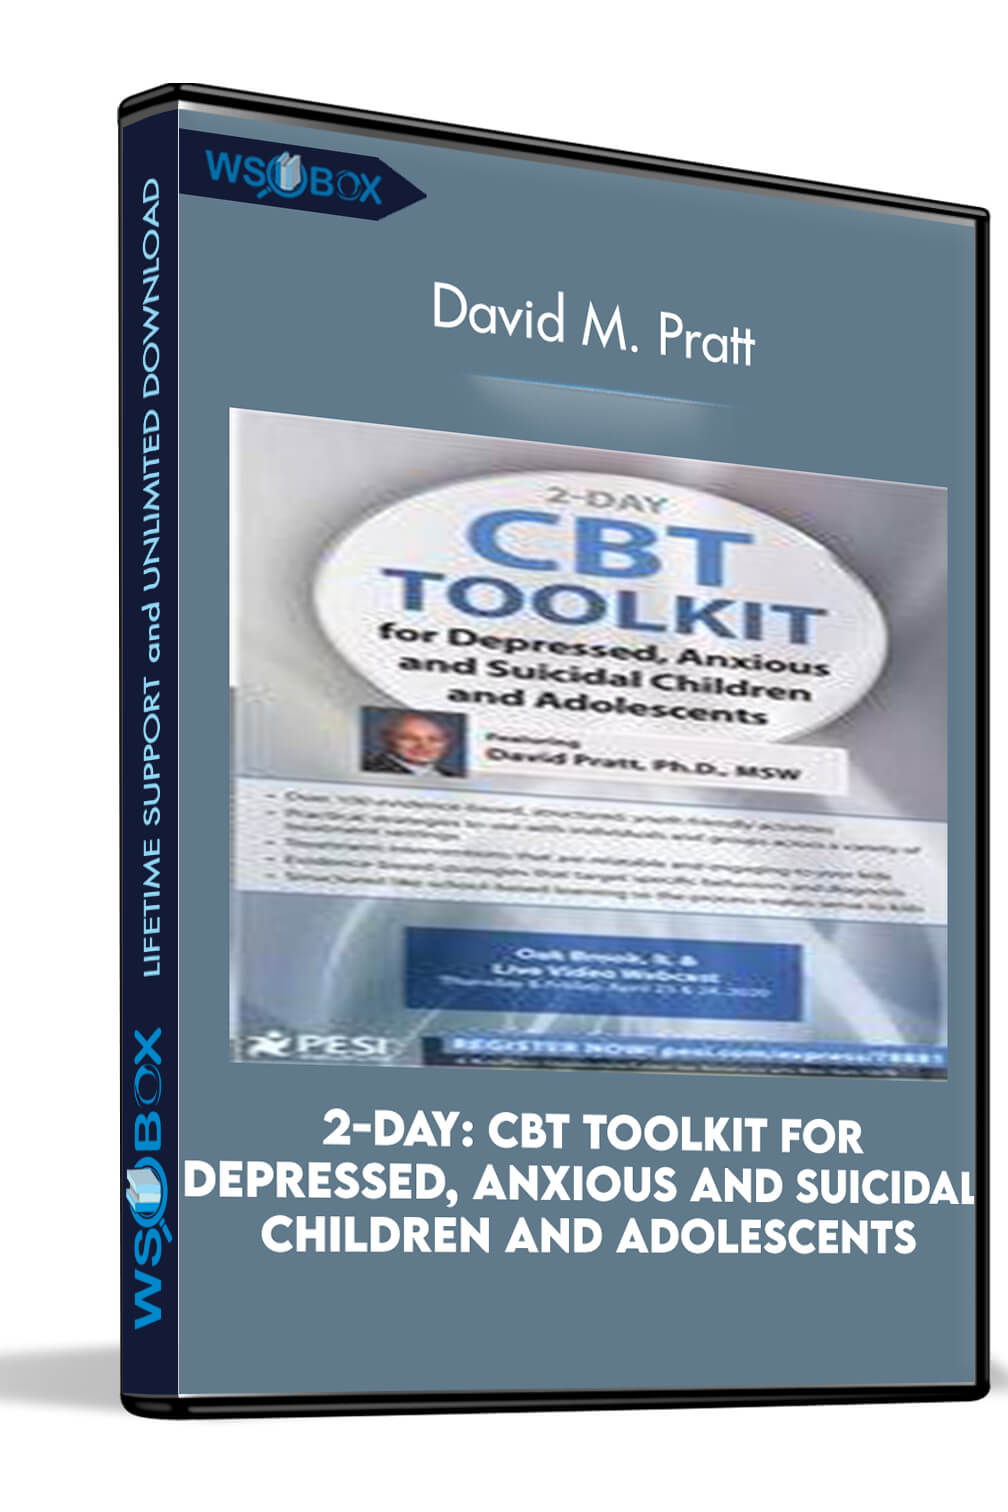 2-Day: CBT Toolkit for Depressed, Anxious and Suicidal Children and Adolescents – David M. Pratt